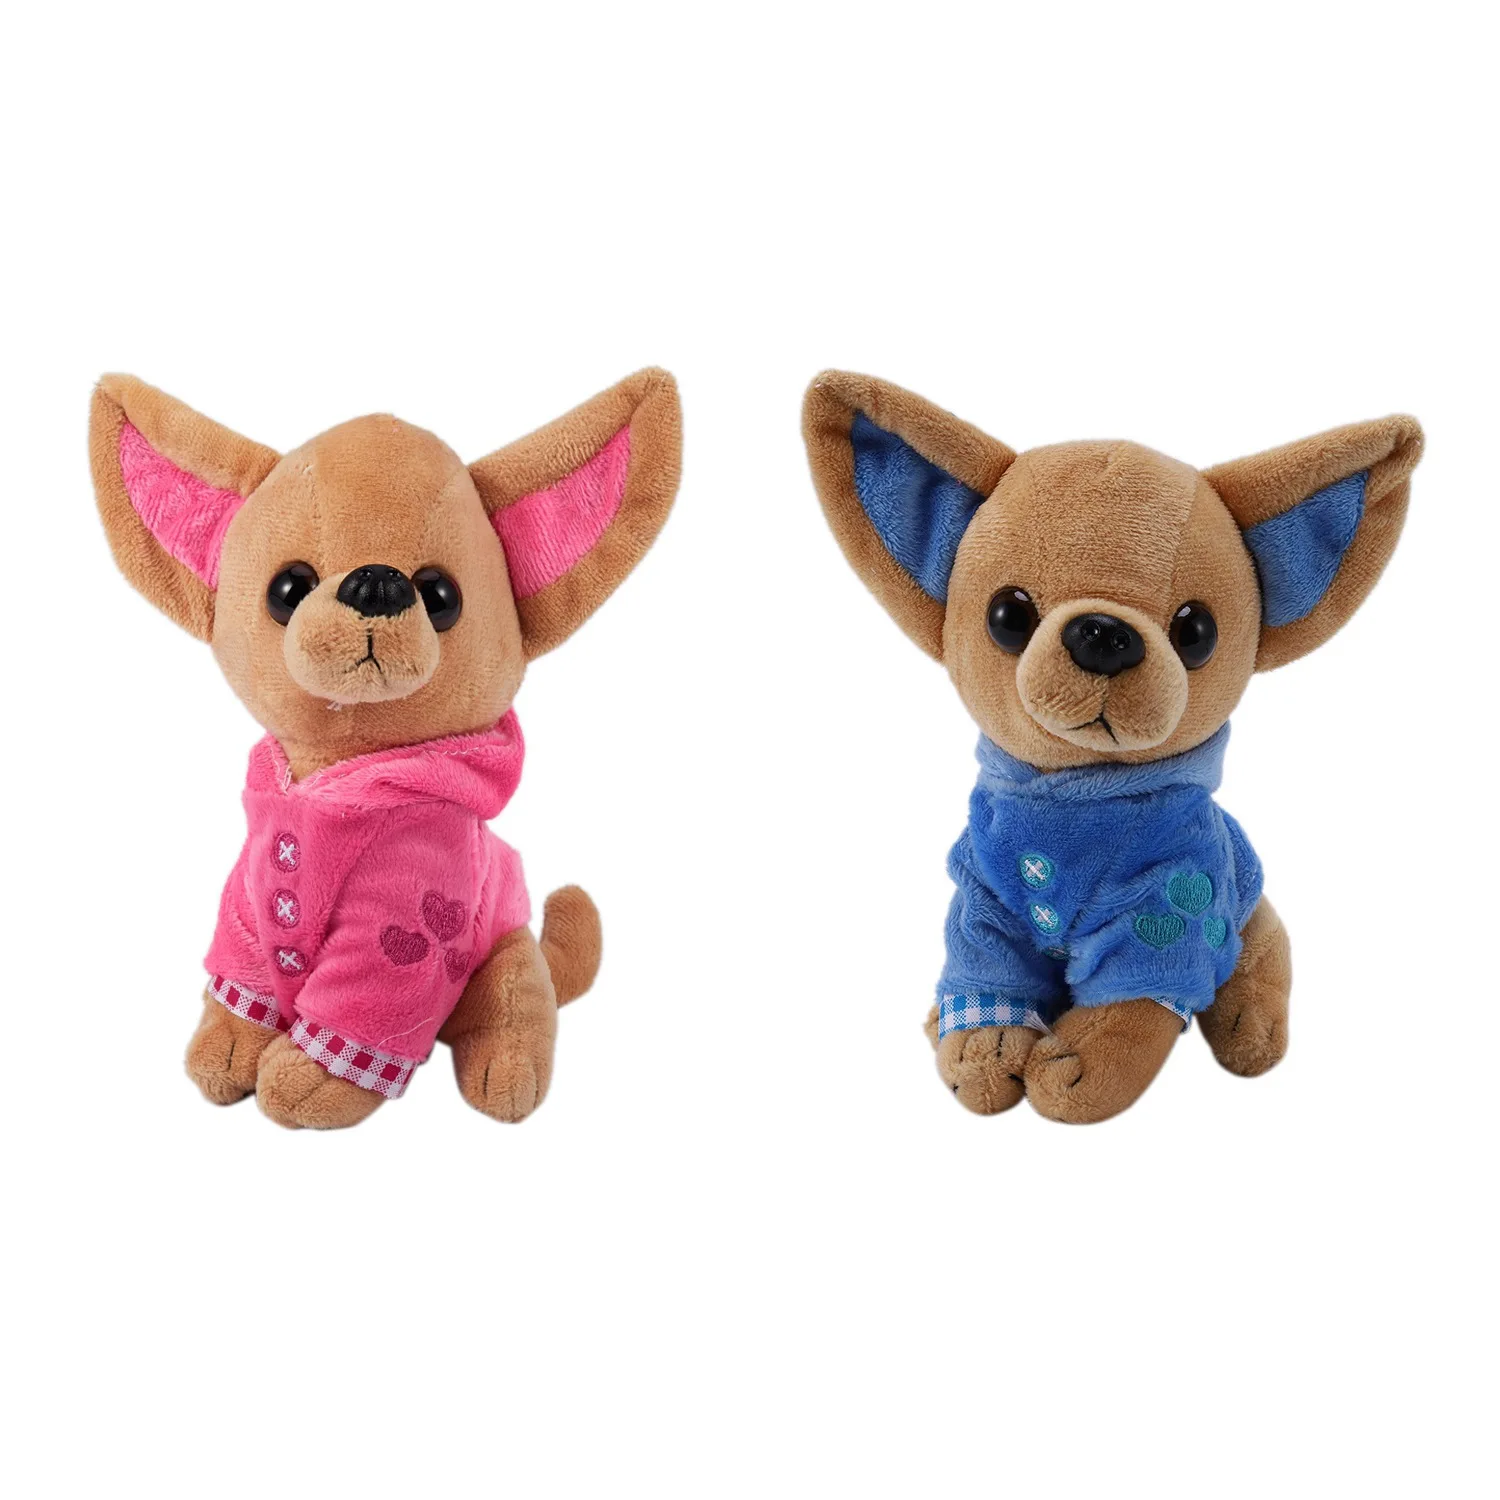 

2 Pcs 17cm Chihuahua Puppy Kids Toy Kawaii Simulation Animal Doll Birthday Gift for Dog Plush Toy, Red & Blue